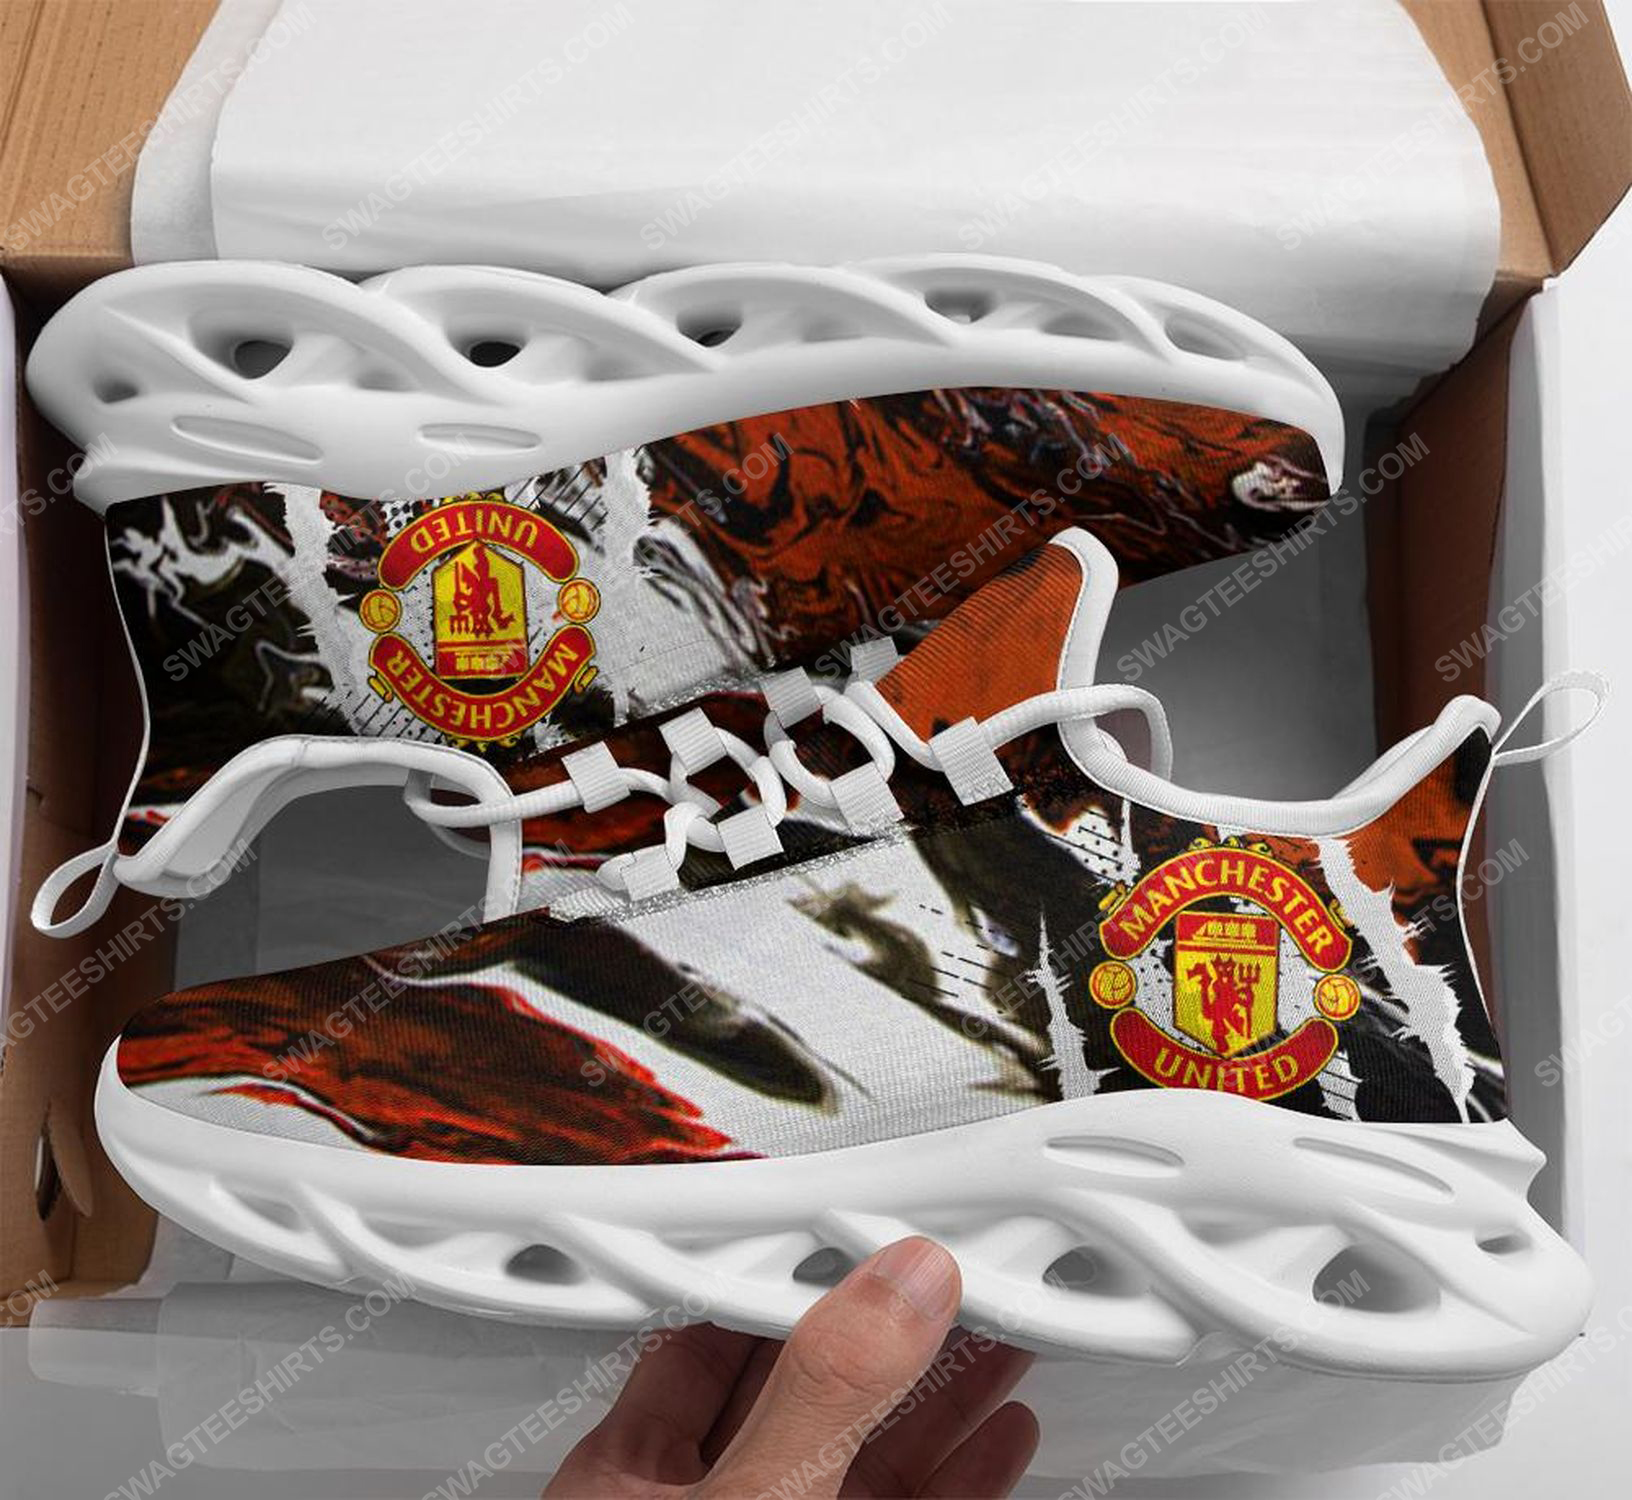 [special edition] The manchester united football club max soul shoes – Maria